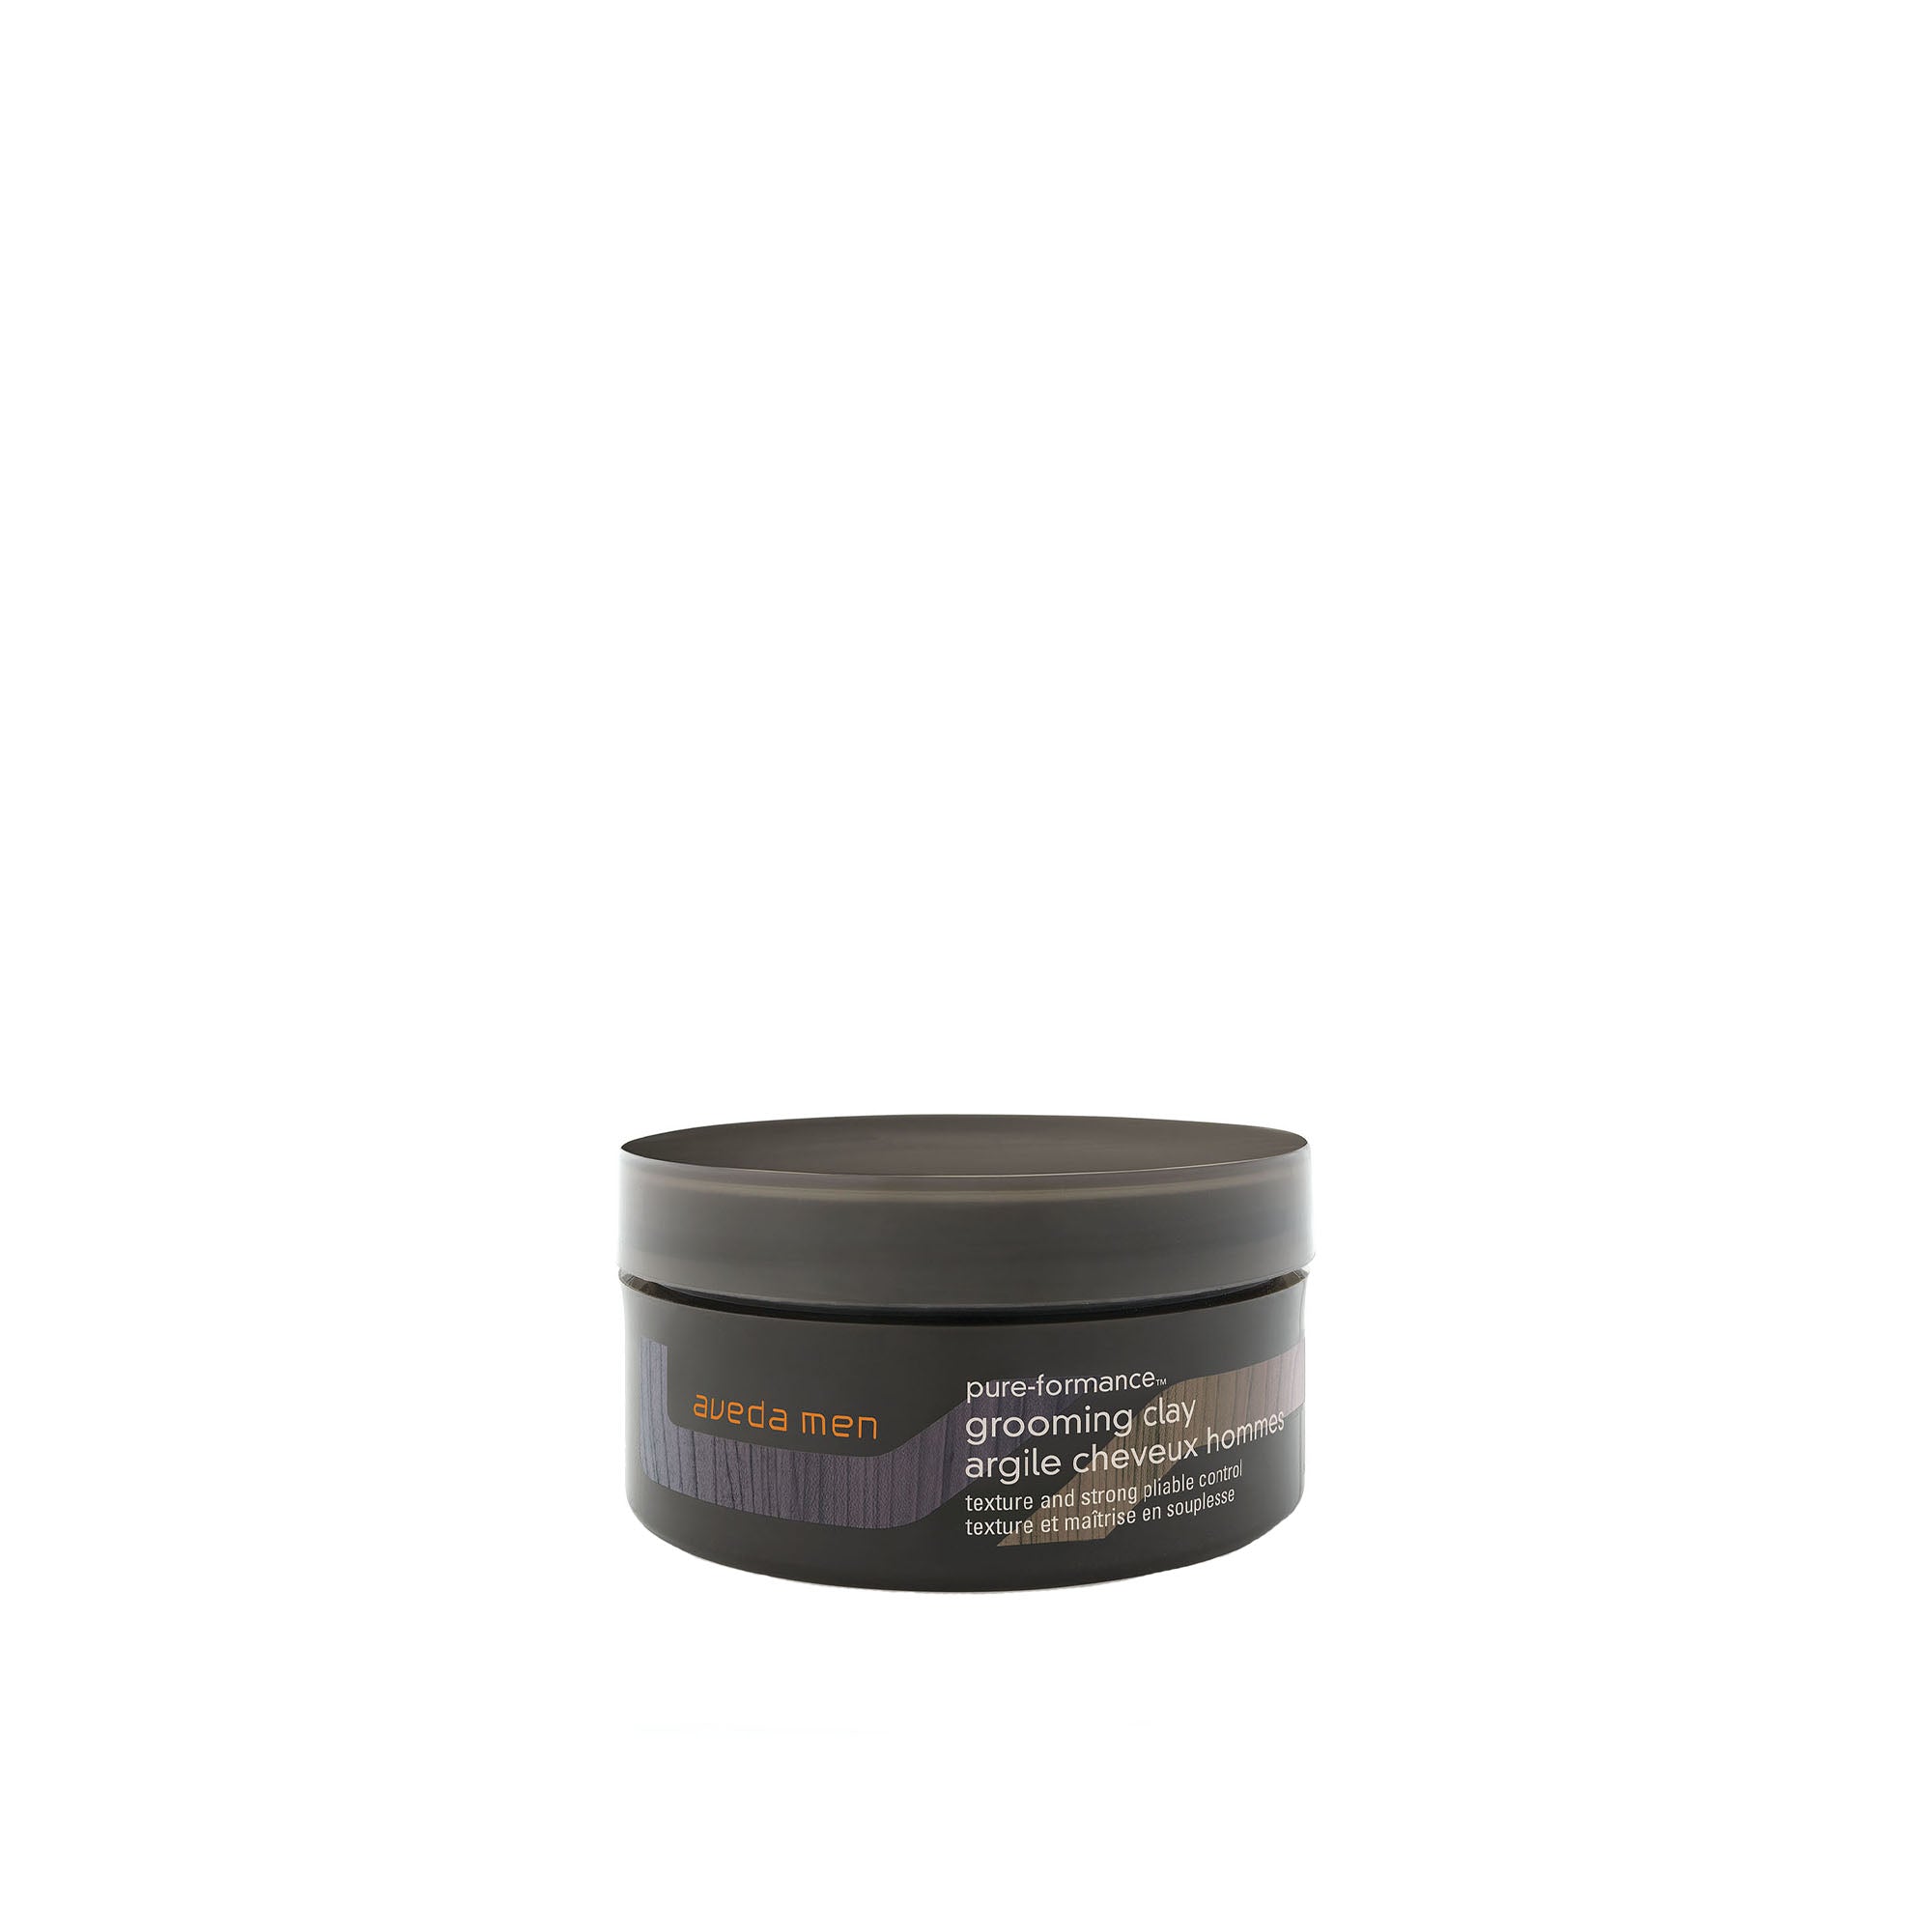 Aveda Men's Pure-Formance Grooming Clay